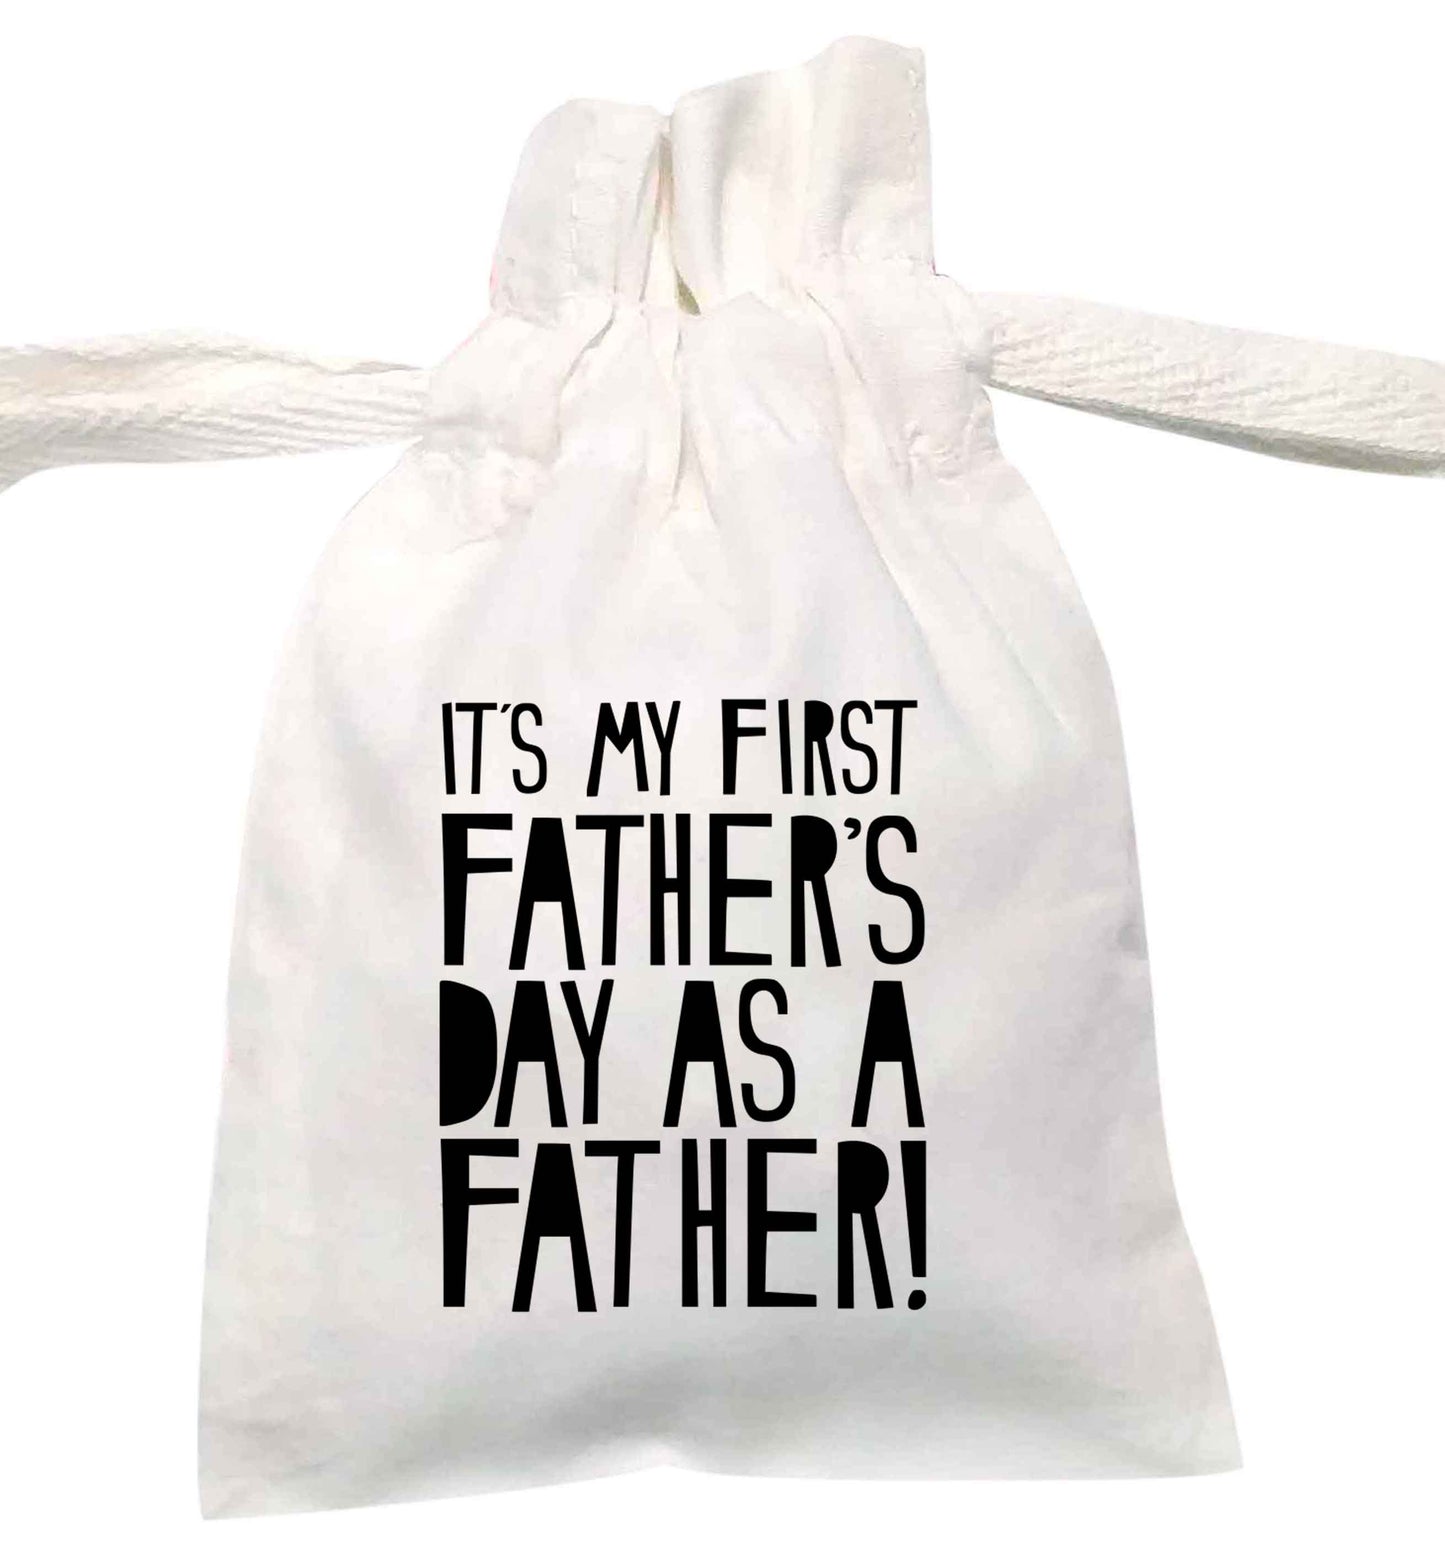 It's my first father's day as a father! | XS - L | Pouch / Drawstring bag / Sack | Organic Cotton | Bulk discounts available!